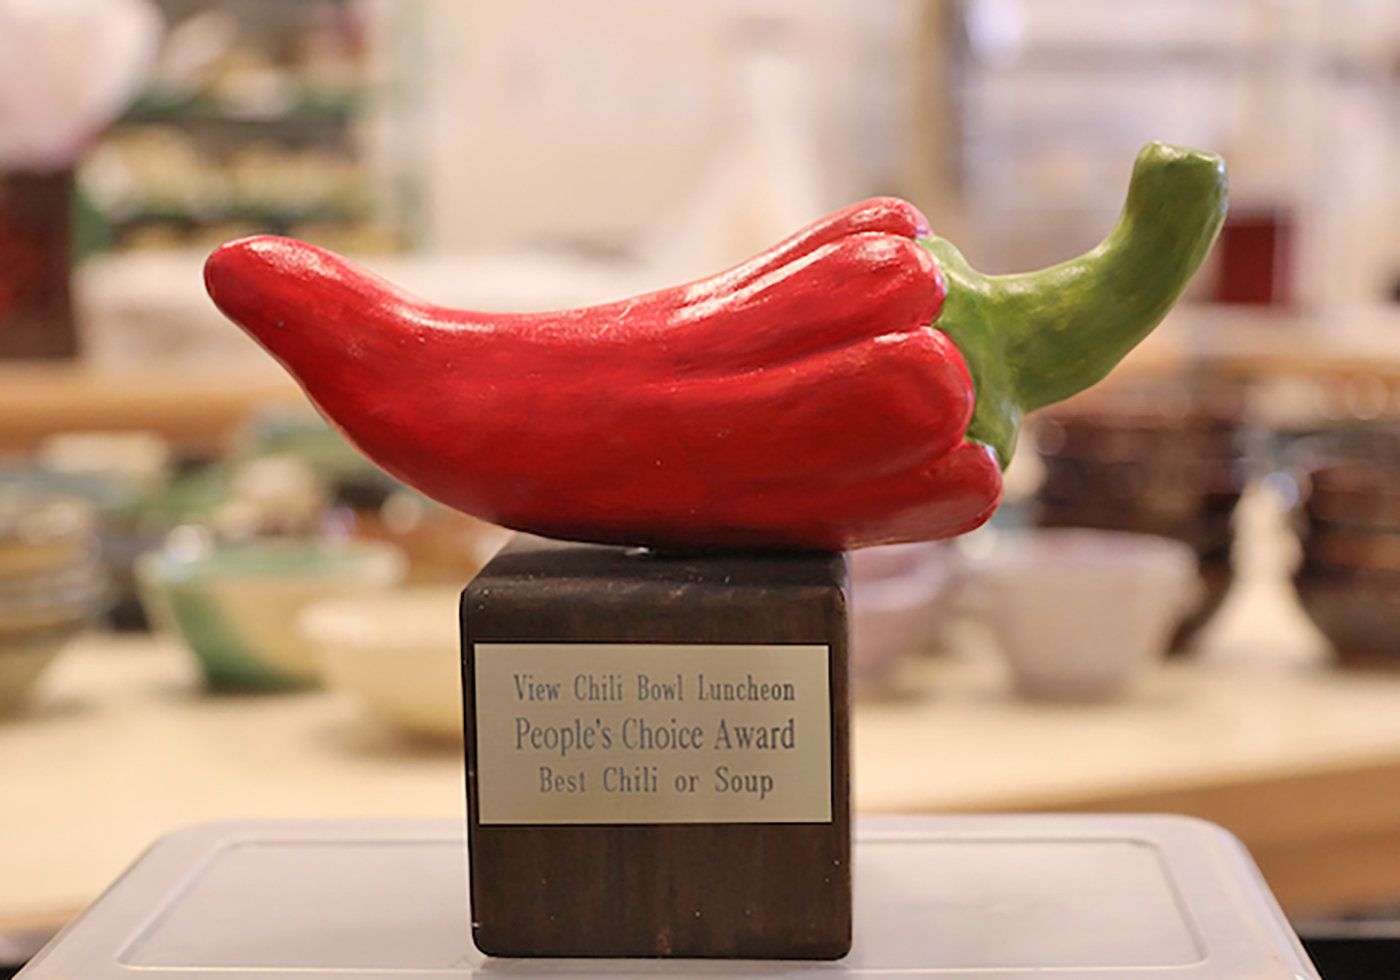 The coveted Chili Bowl traveling trophy that will be given as the People’s Choice Award at this year’s Chili Bowl Luncheon at View.